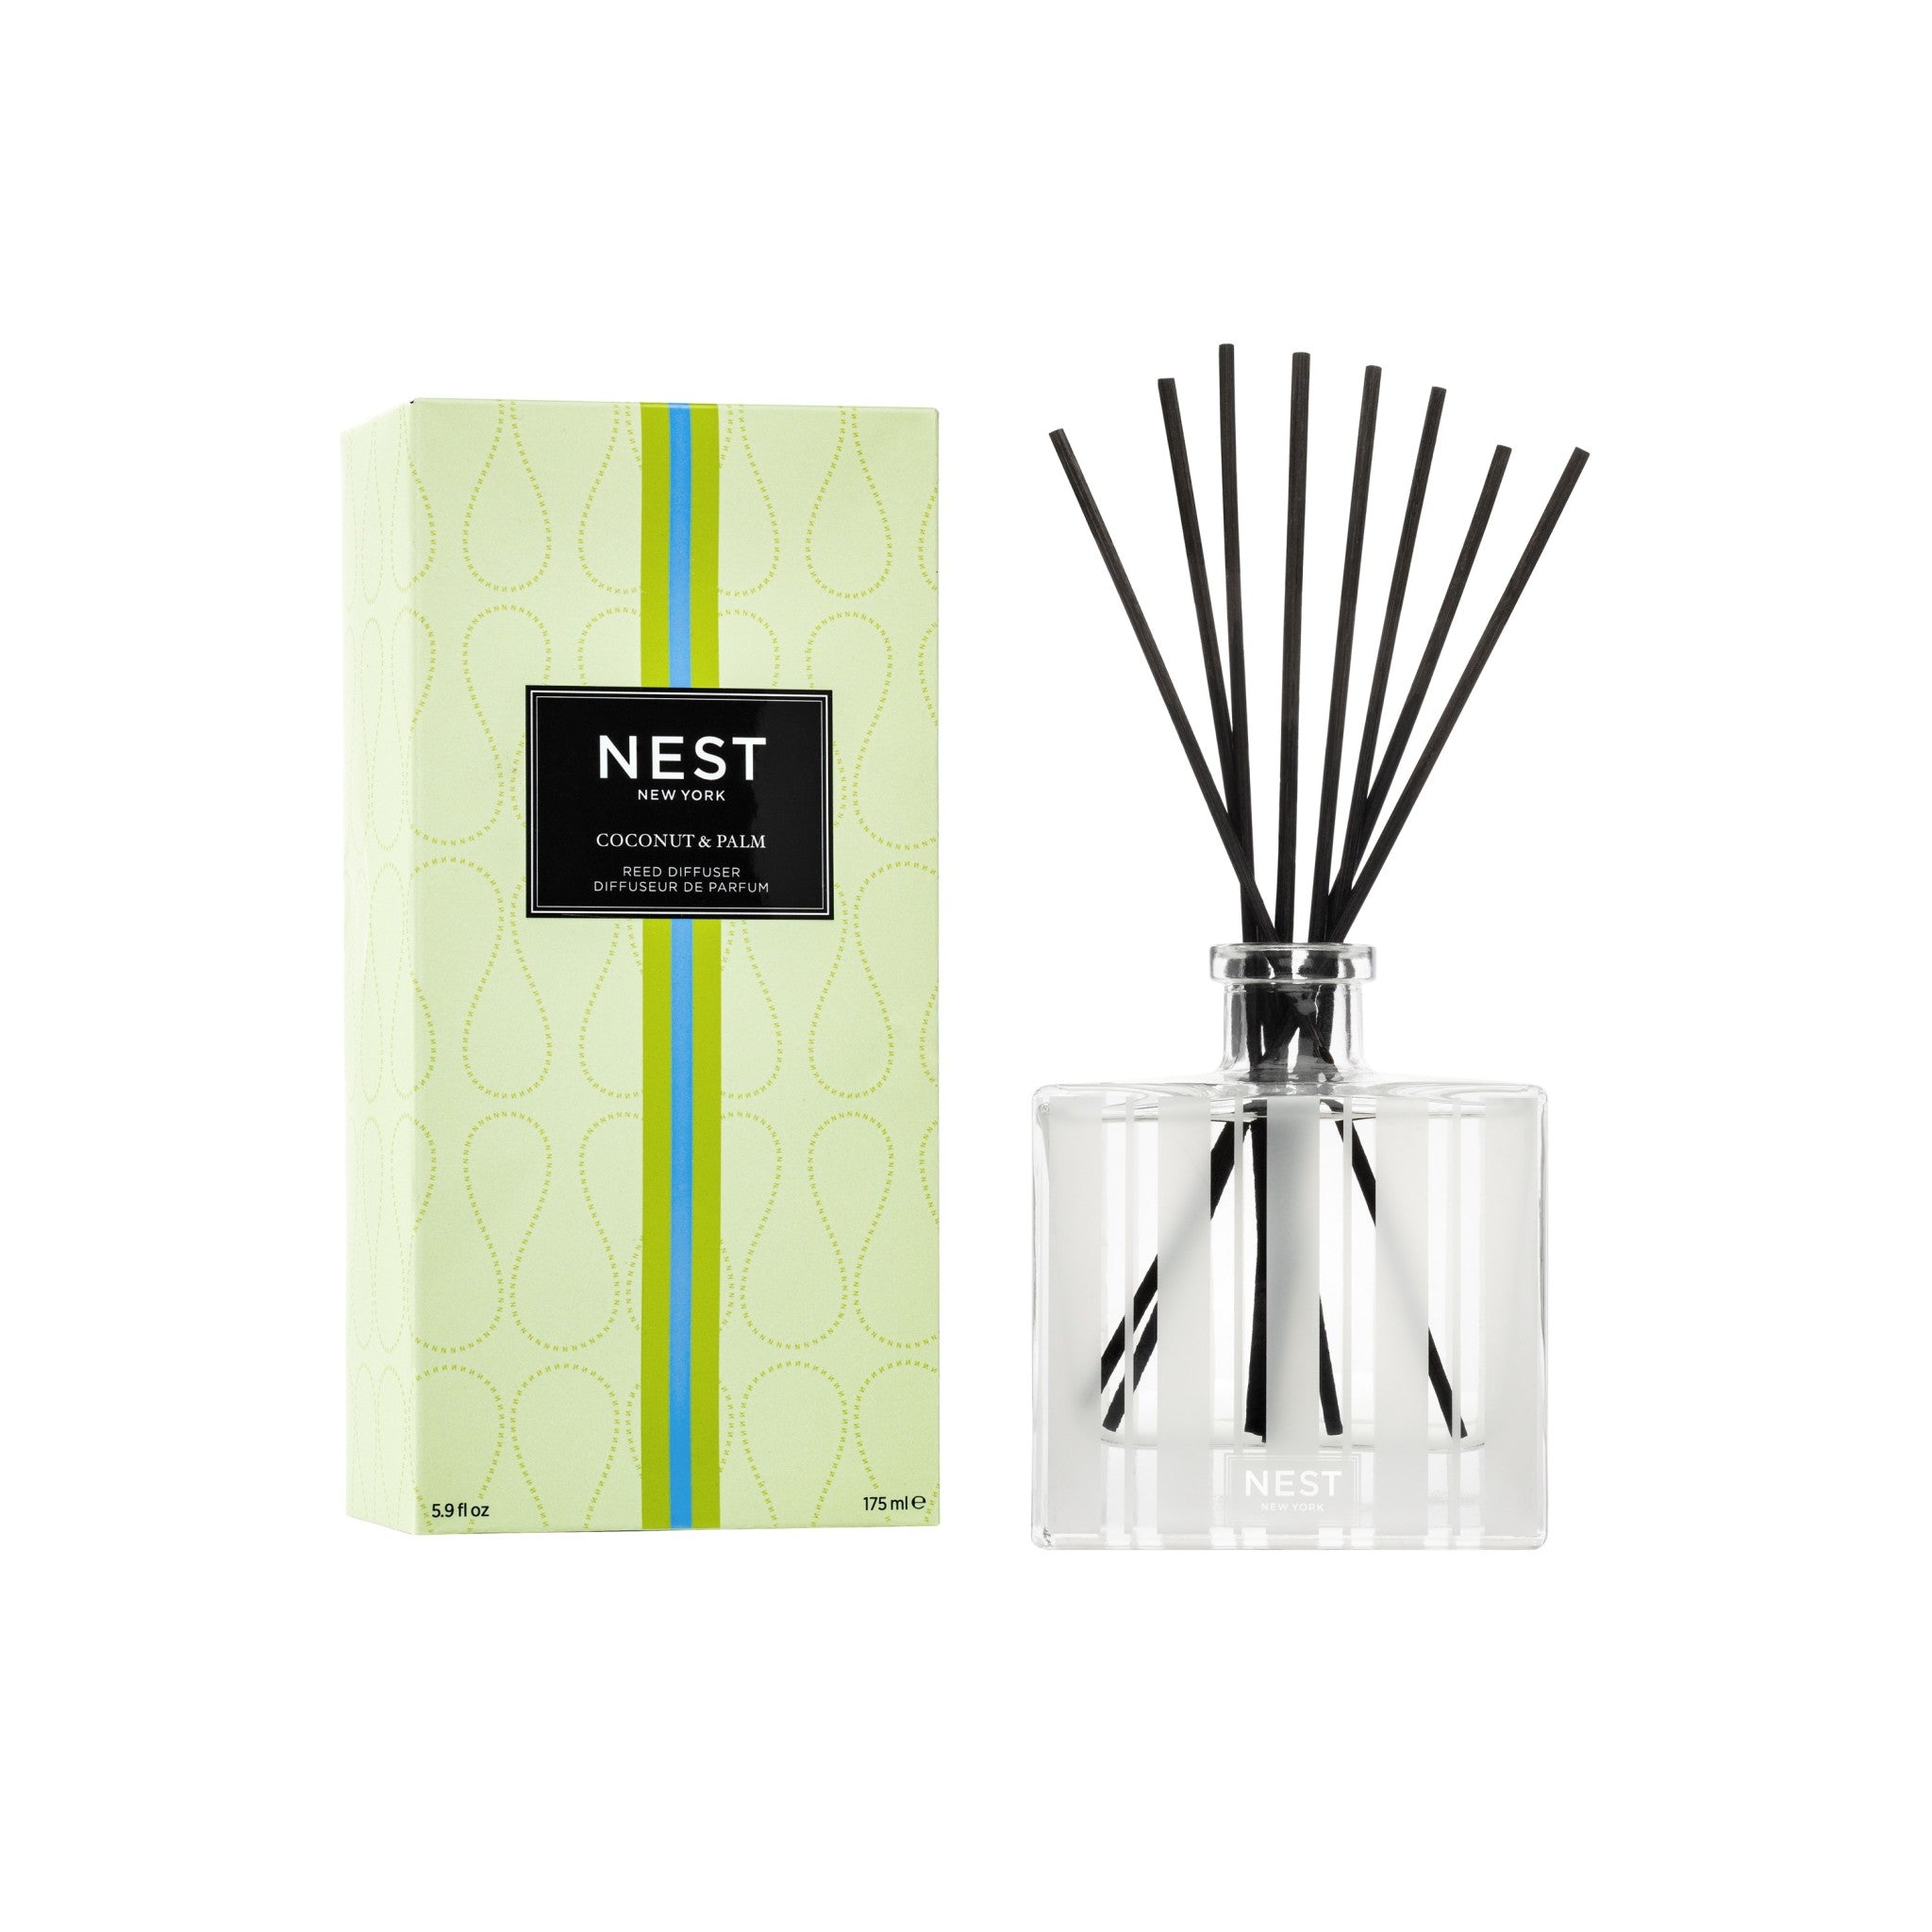 Nest Coconut and Palm Reed Diffuser main image.